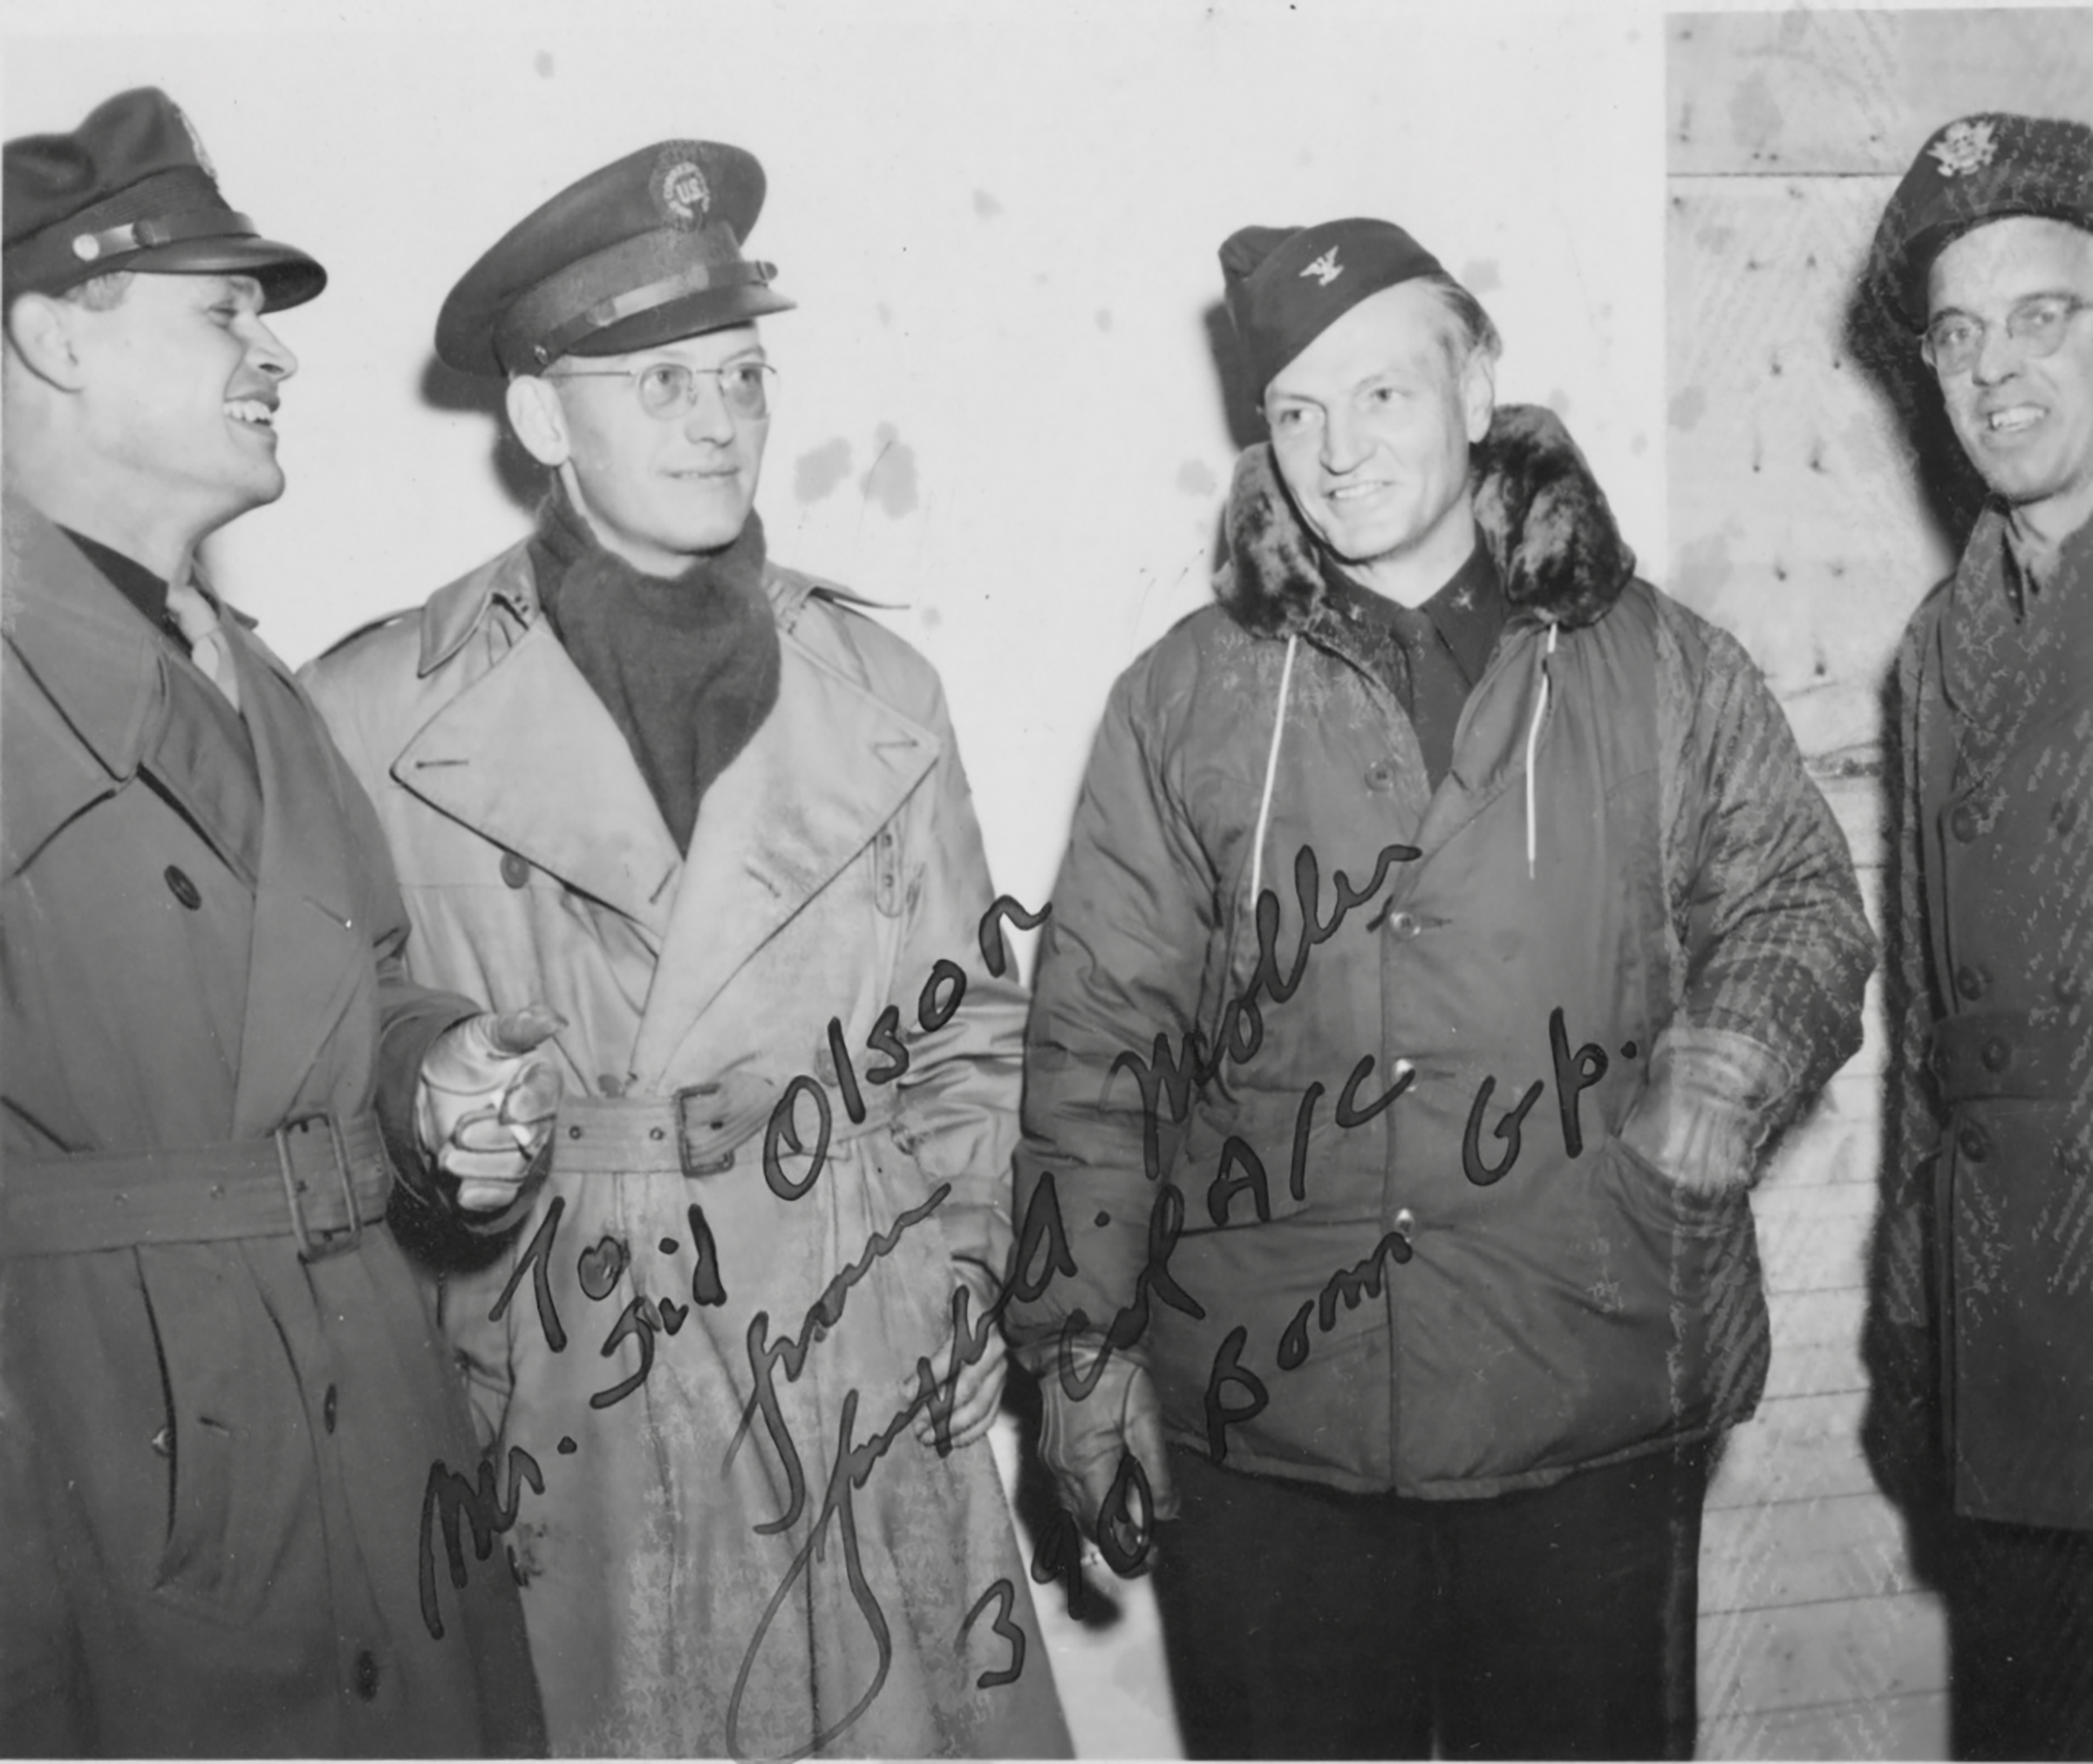 Sid-Olson-with-Col.-Joseph-A.-Moller,-390th-Bomb-Group,-8th-AirForce,-Parham-England